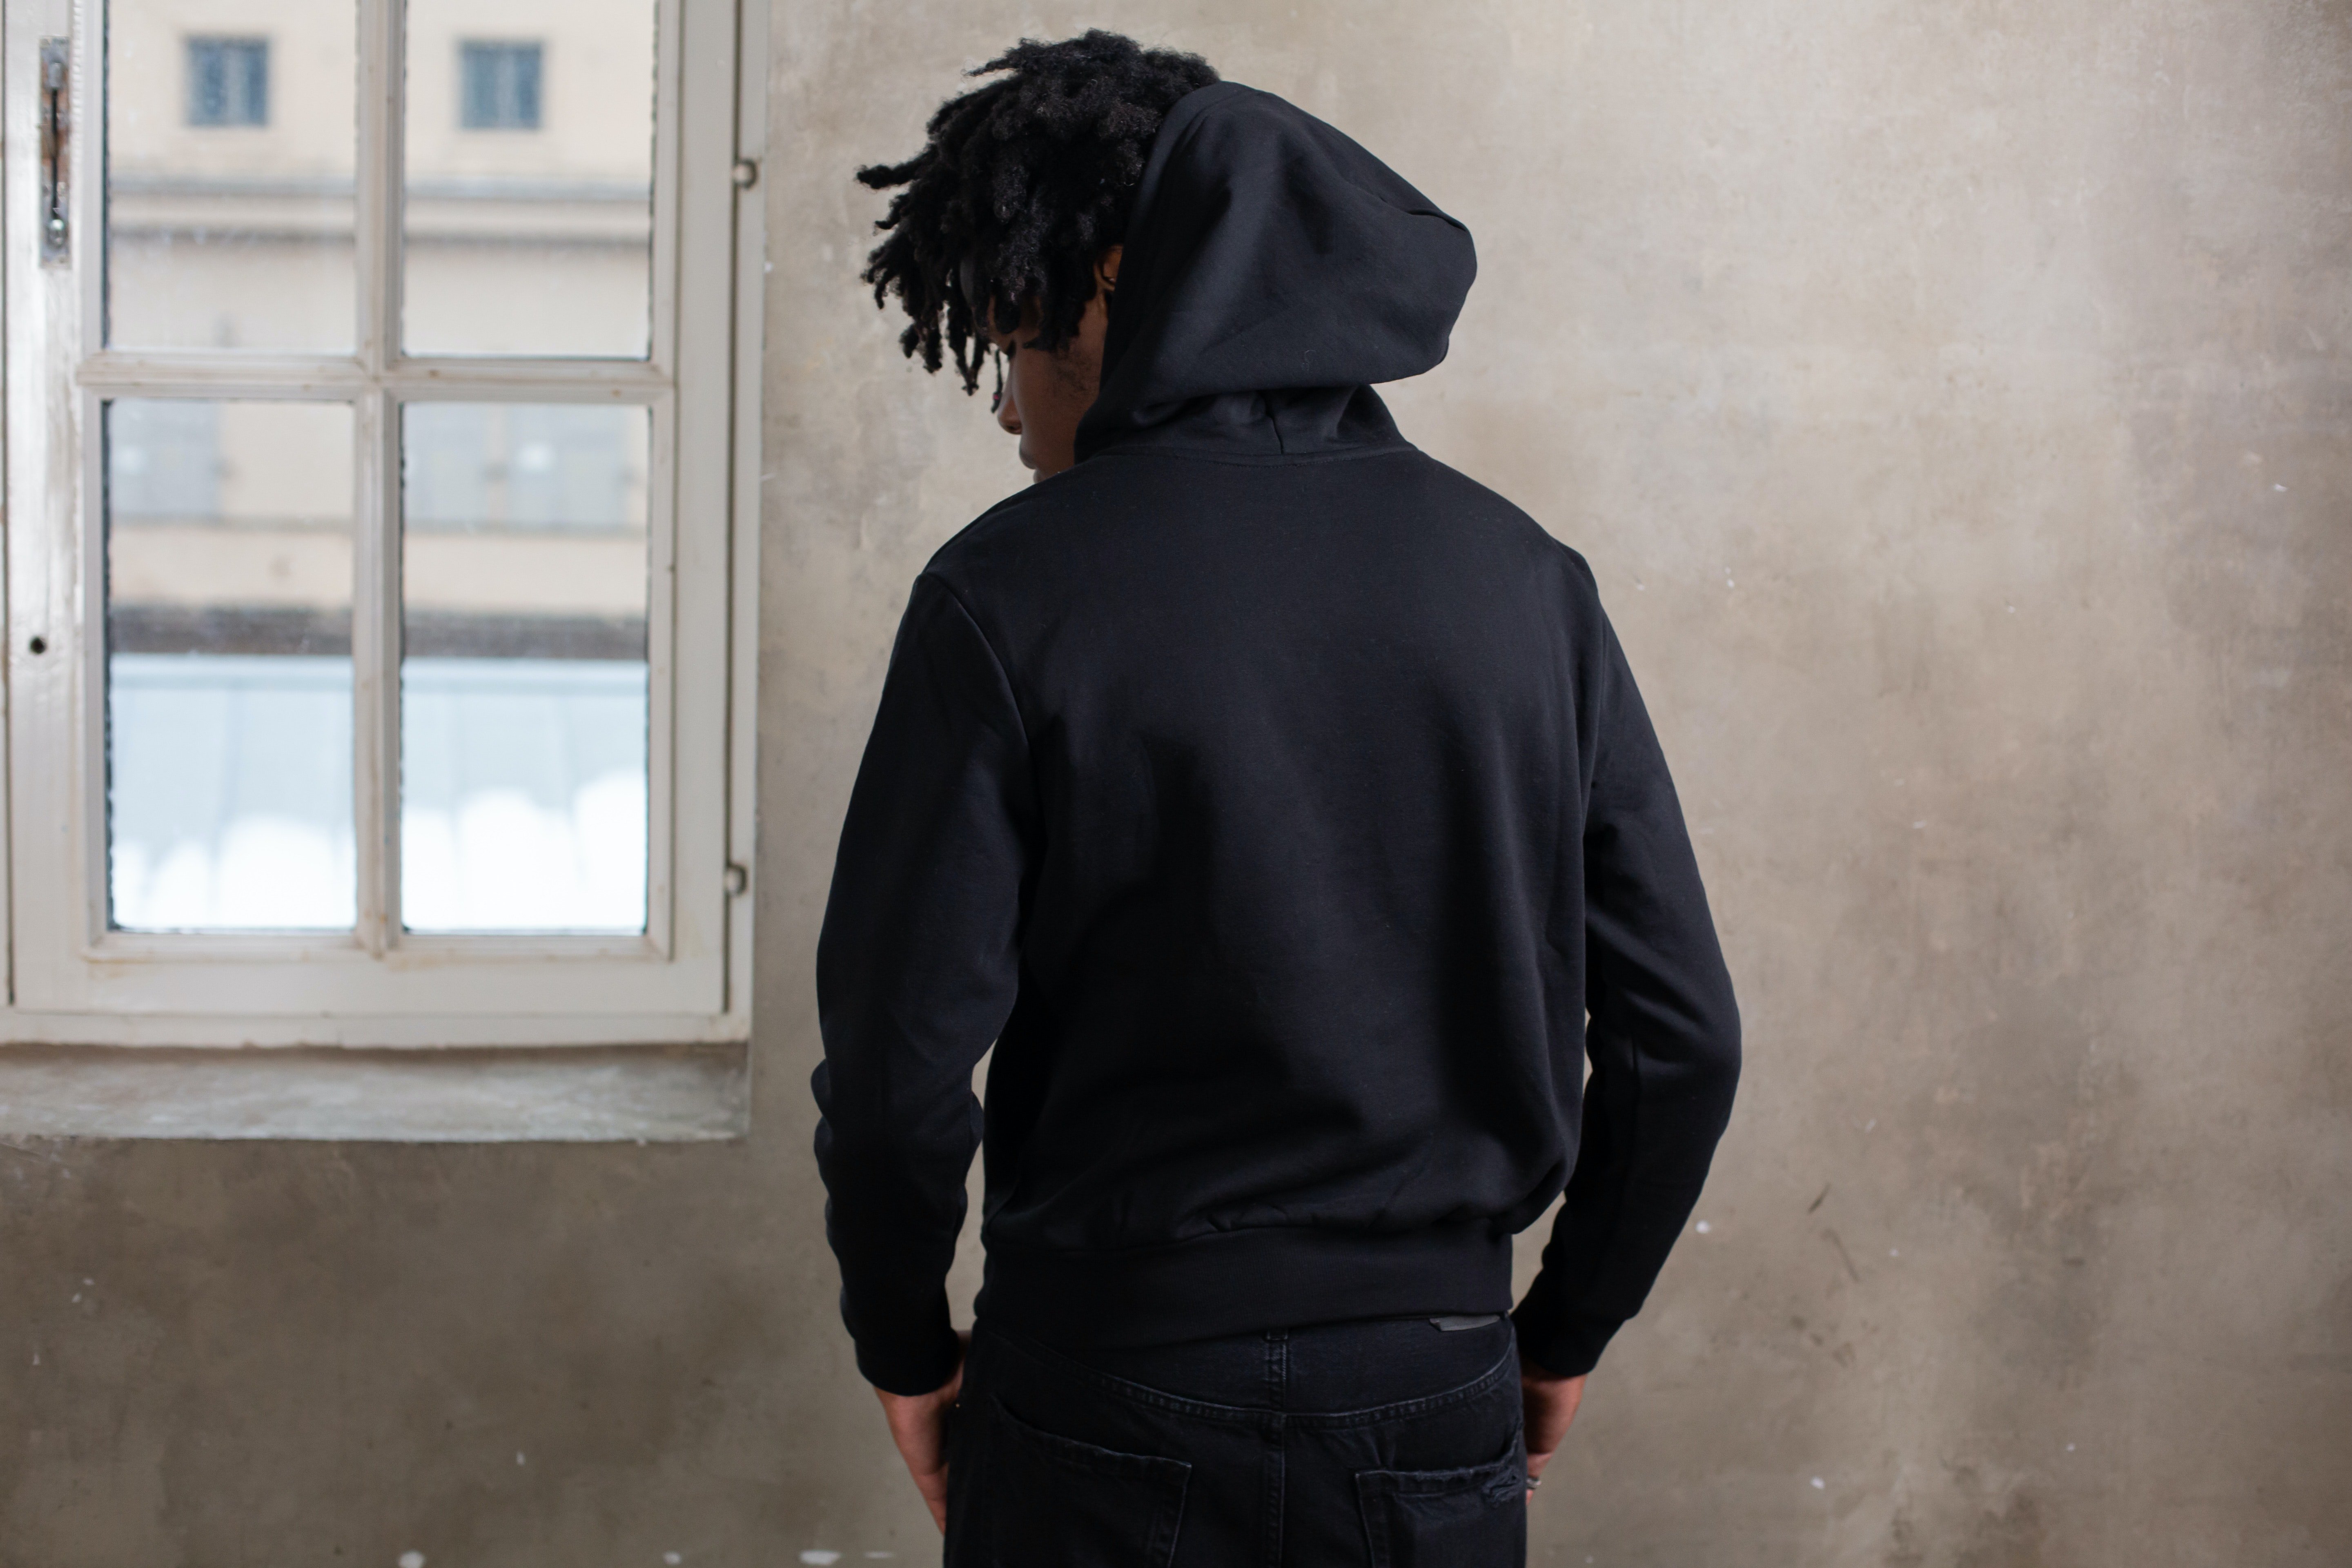 Teenager standing in front of a wall wearing a black hoodie | Photo: Pexels